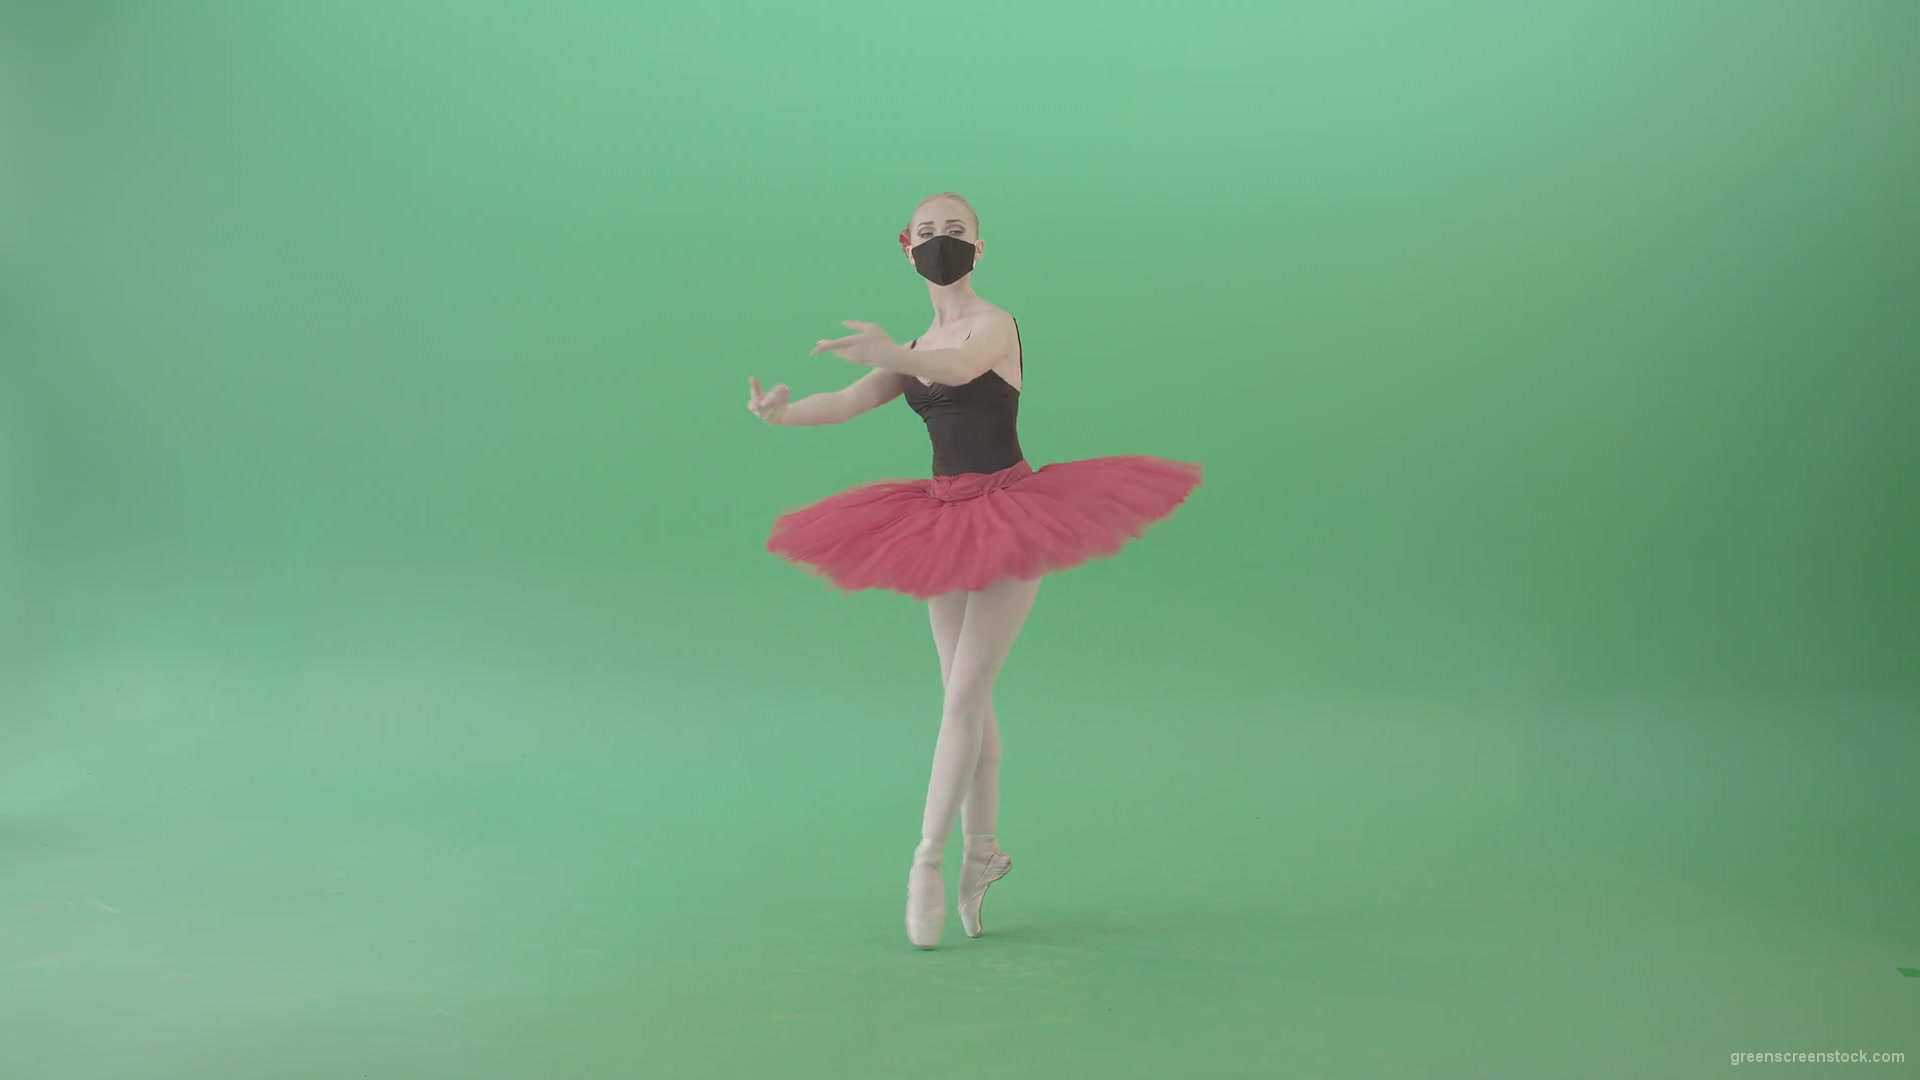 Tinny-Ballet-Dancing-Girl-Ballerina-in-red-black-dress-and-mask-welcome-people-for-awards-Green-Screen-Video-Footage-1920_005 Green Screen Stock